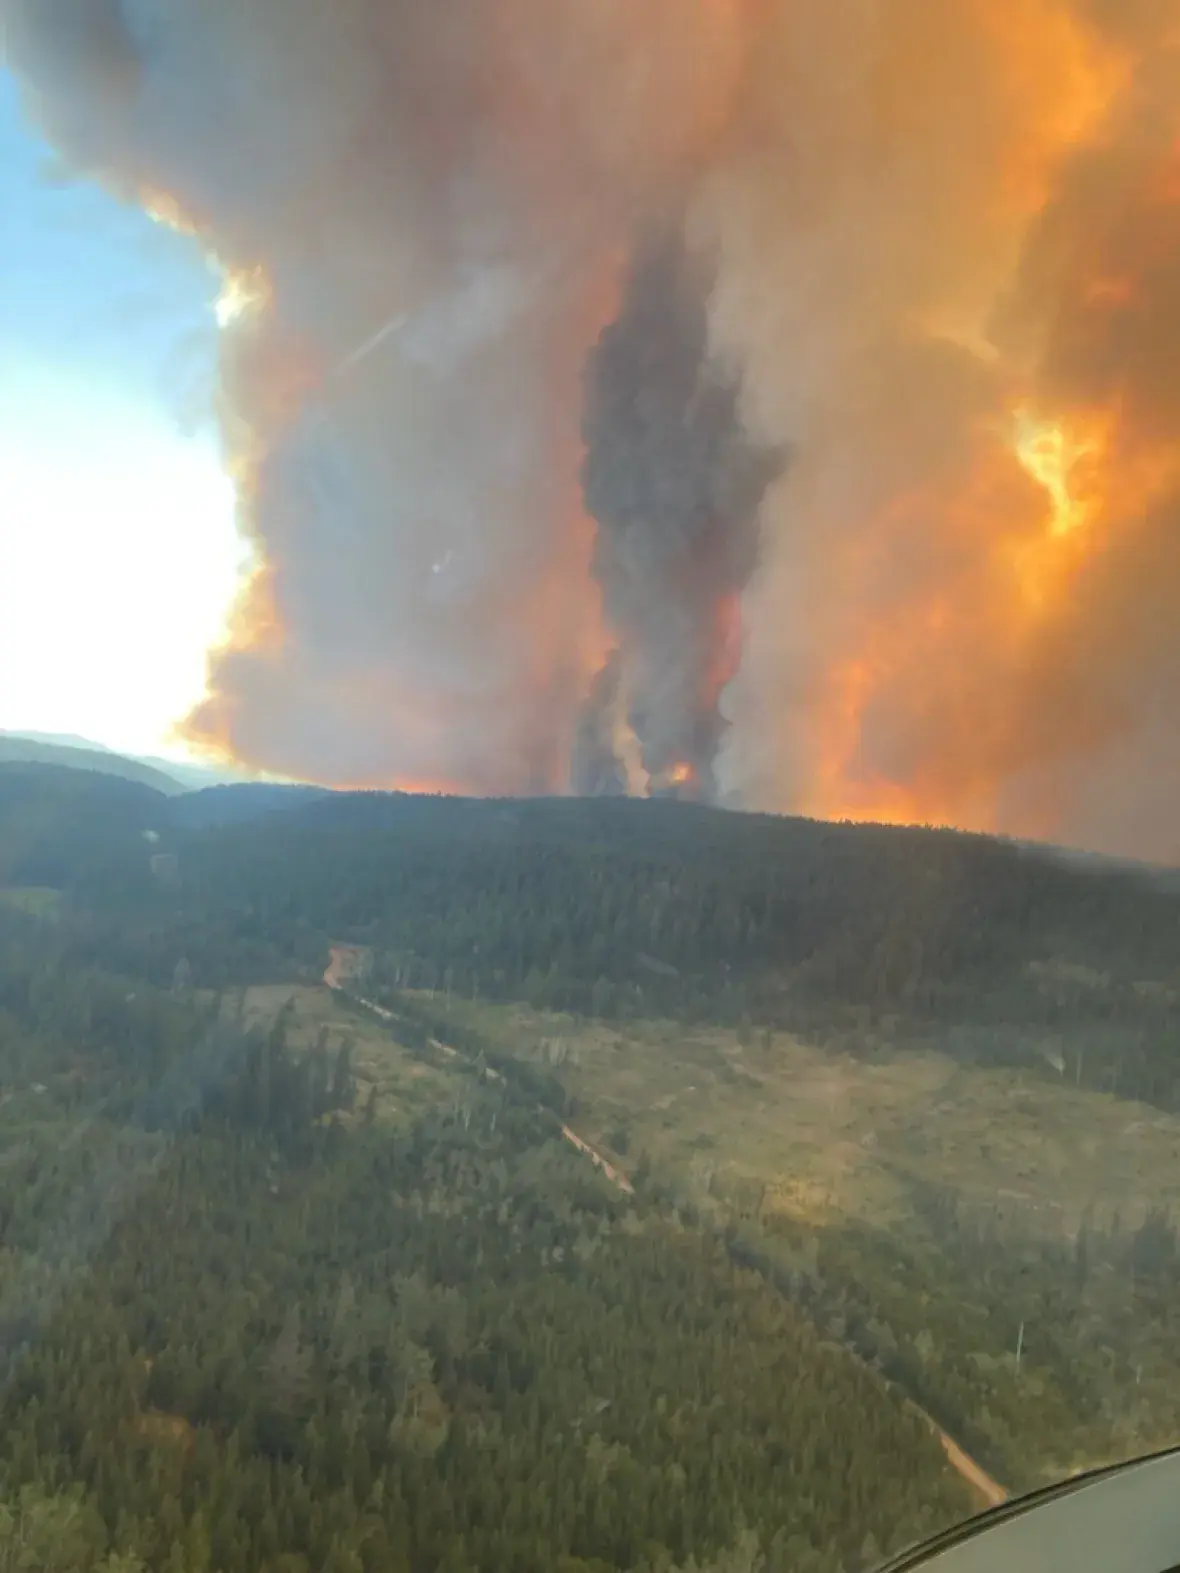 B.C. warns against visiting areas under wildfire alerts, as 250+ fires burn